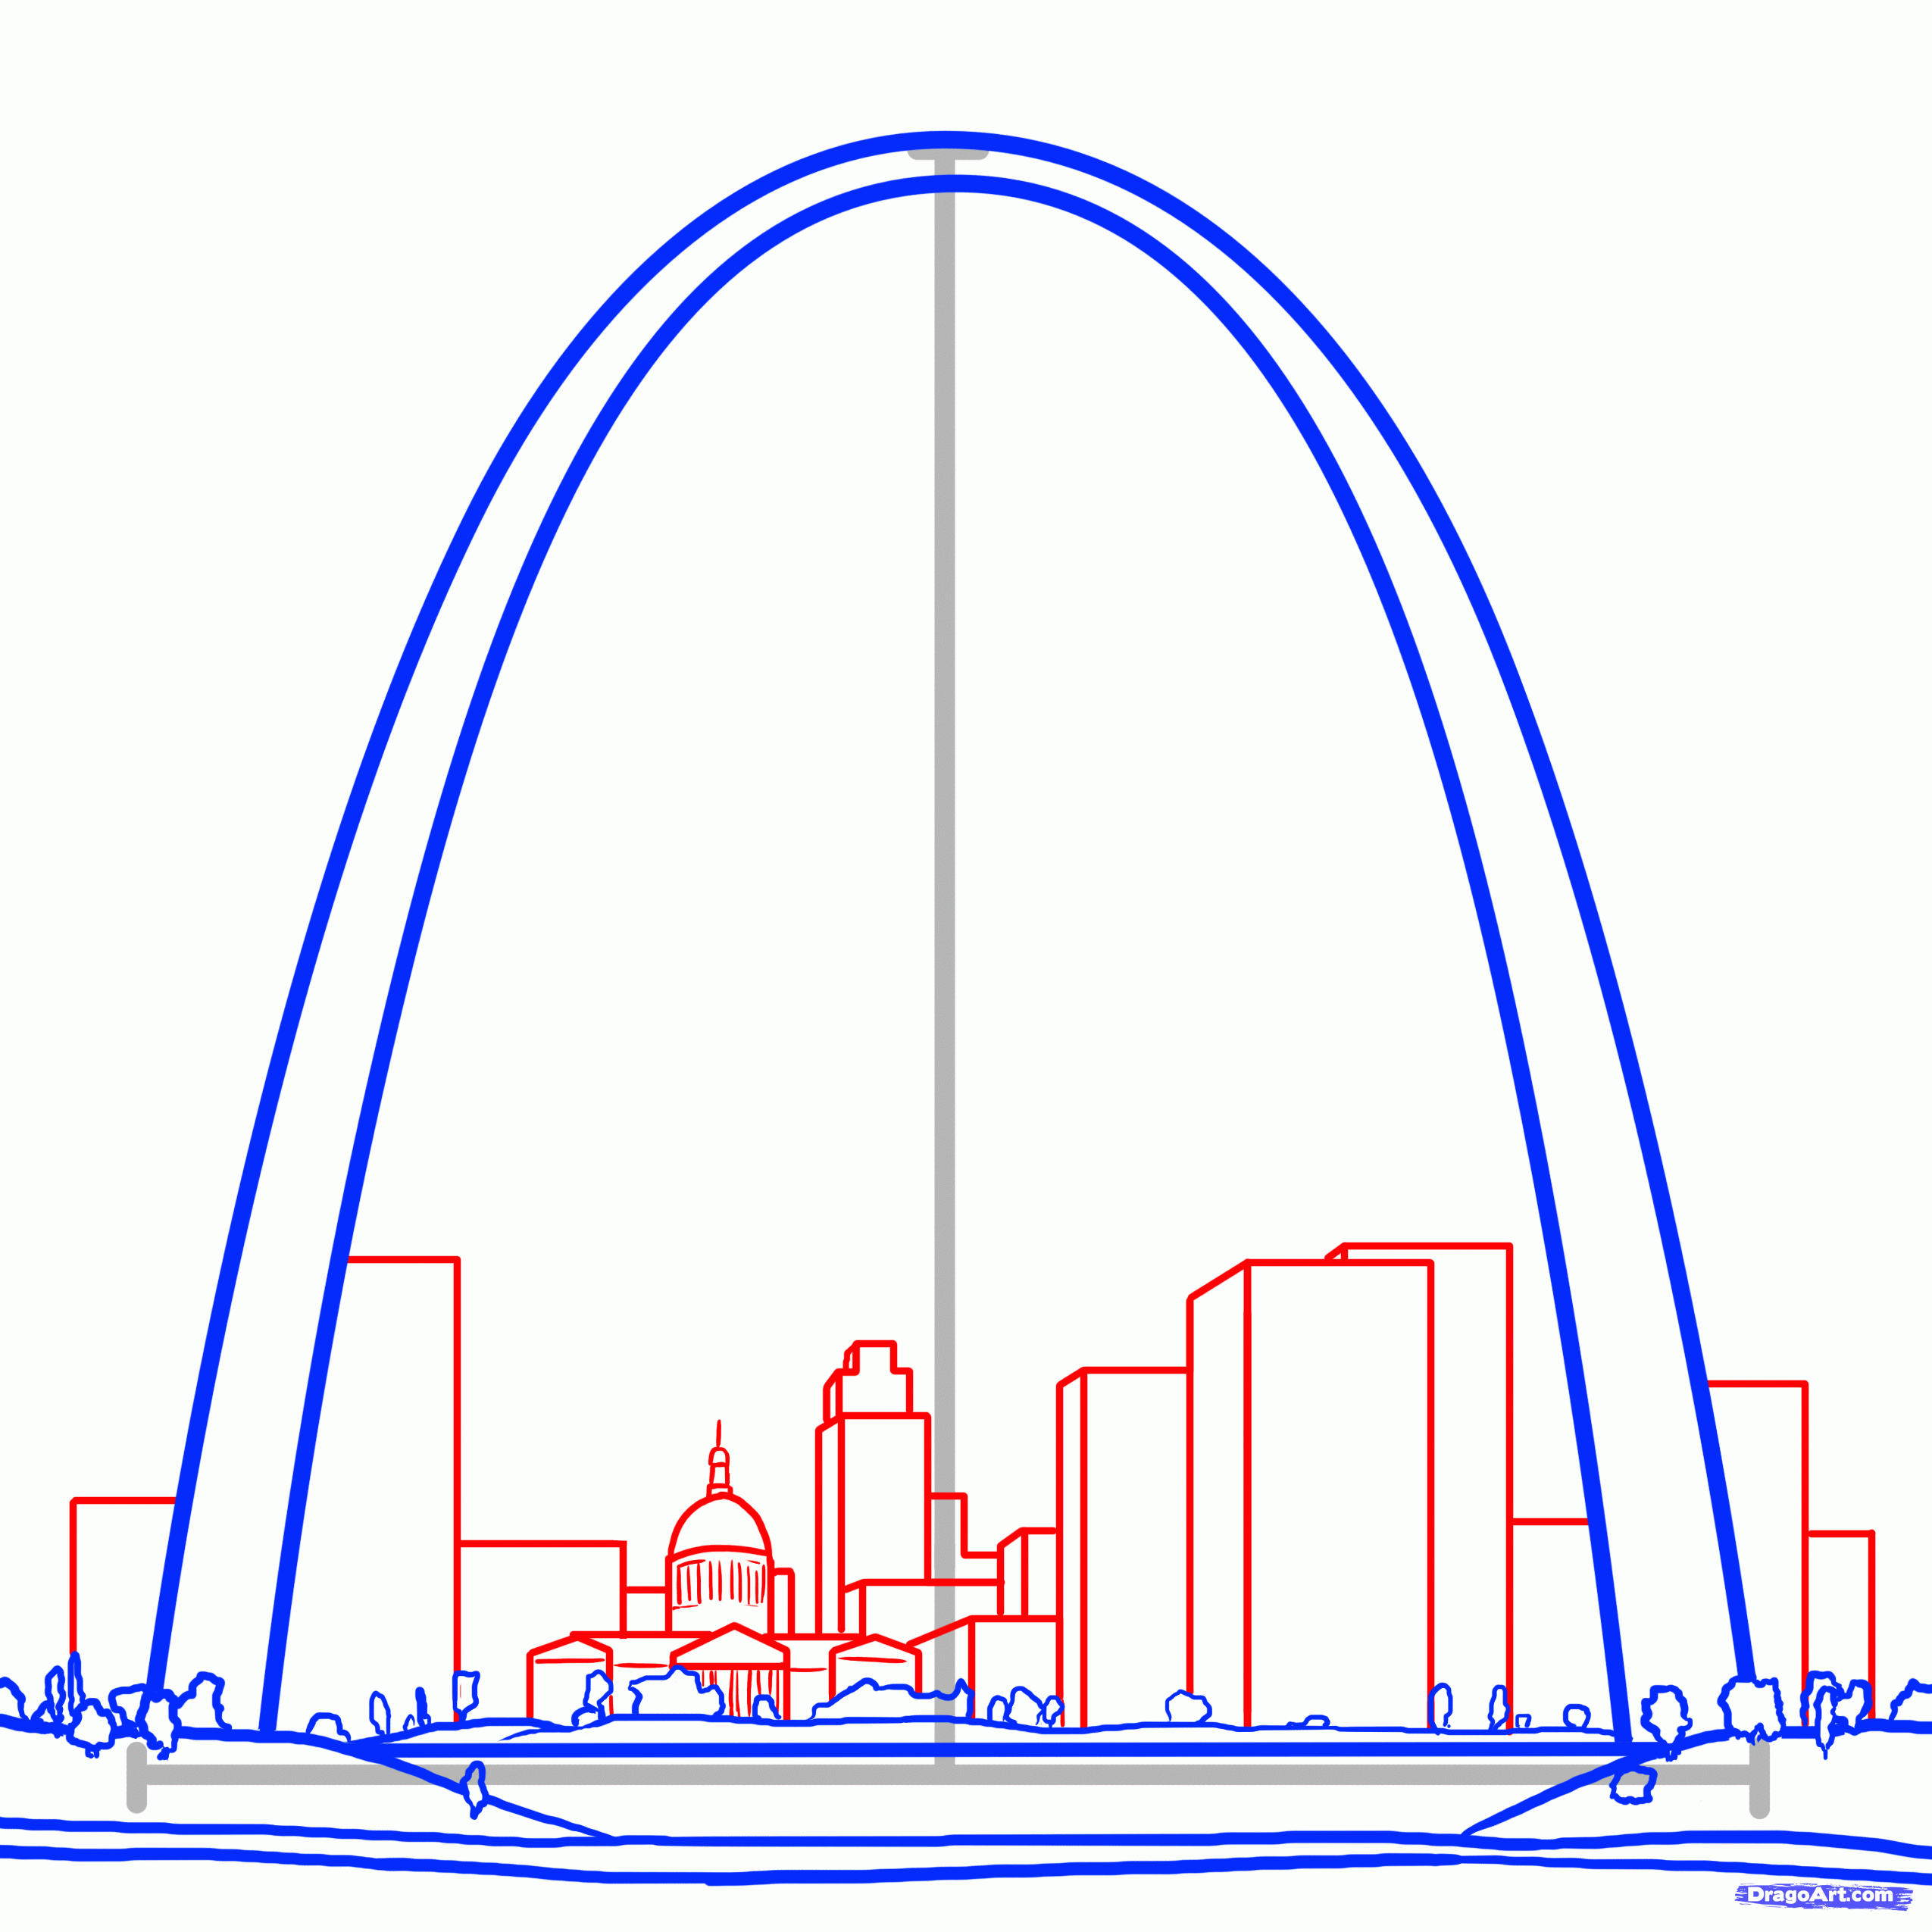 Medium Image  St Louis Arch Png  Free Transparent PNG Download  PNGkey